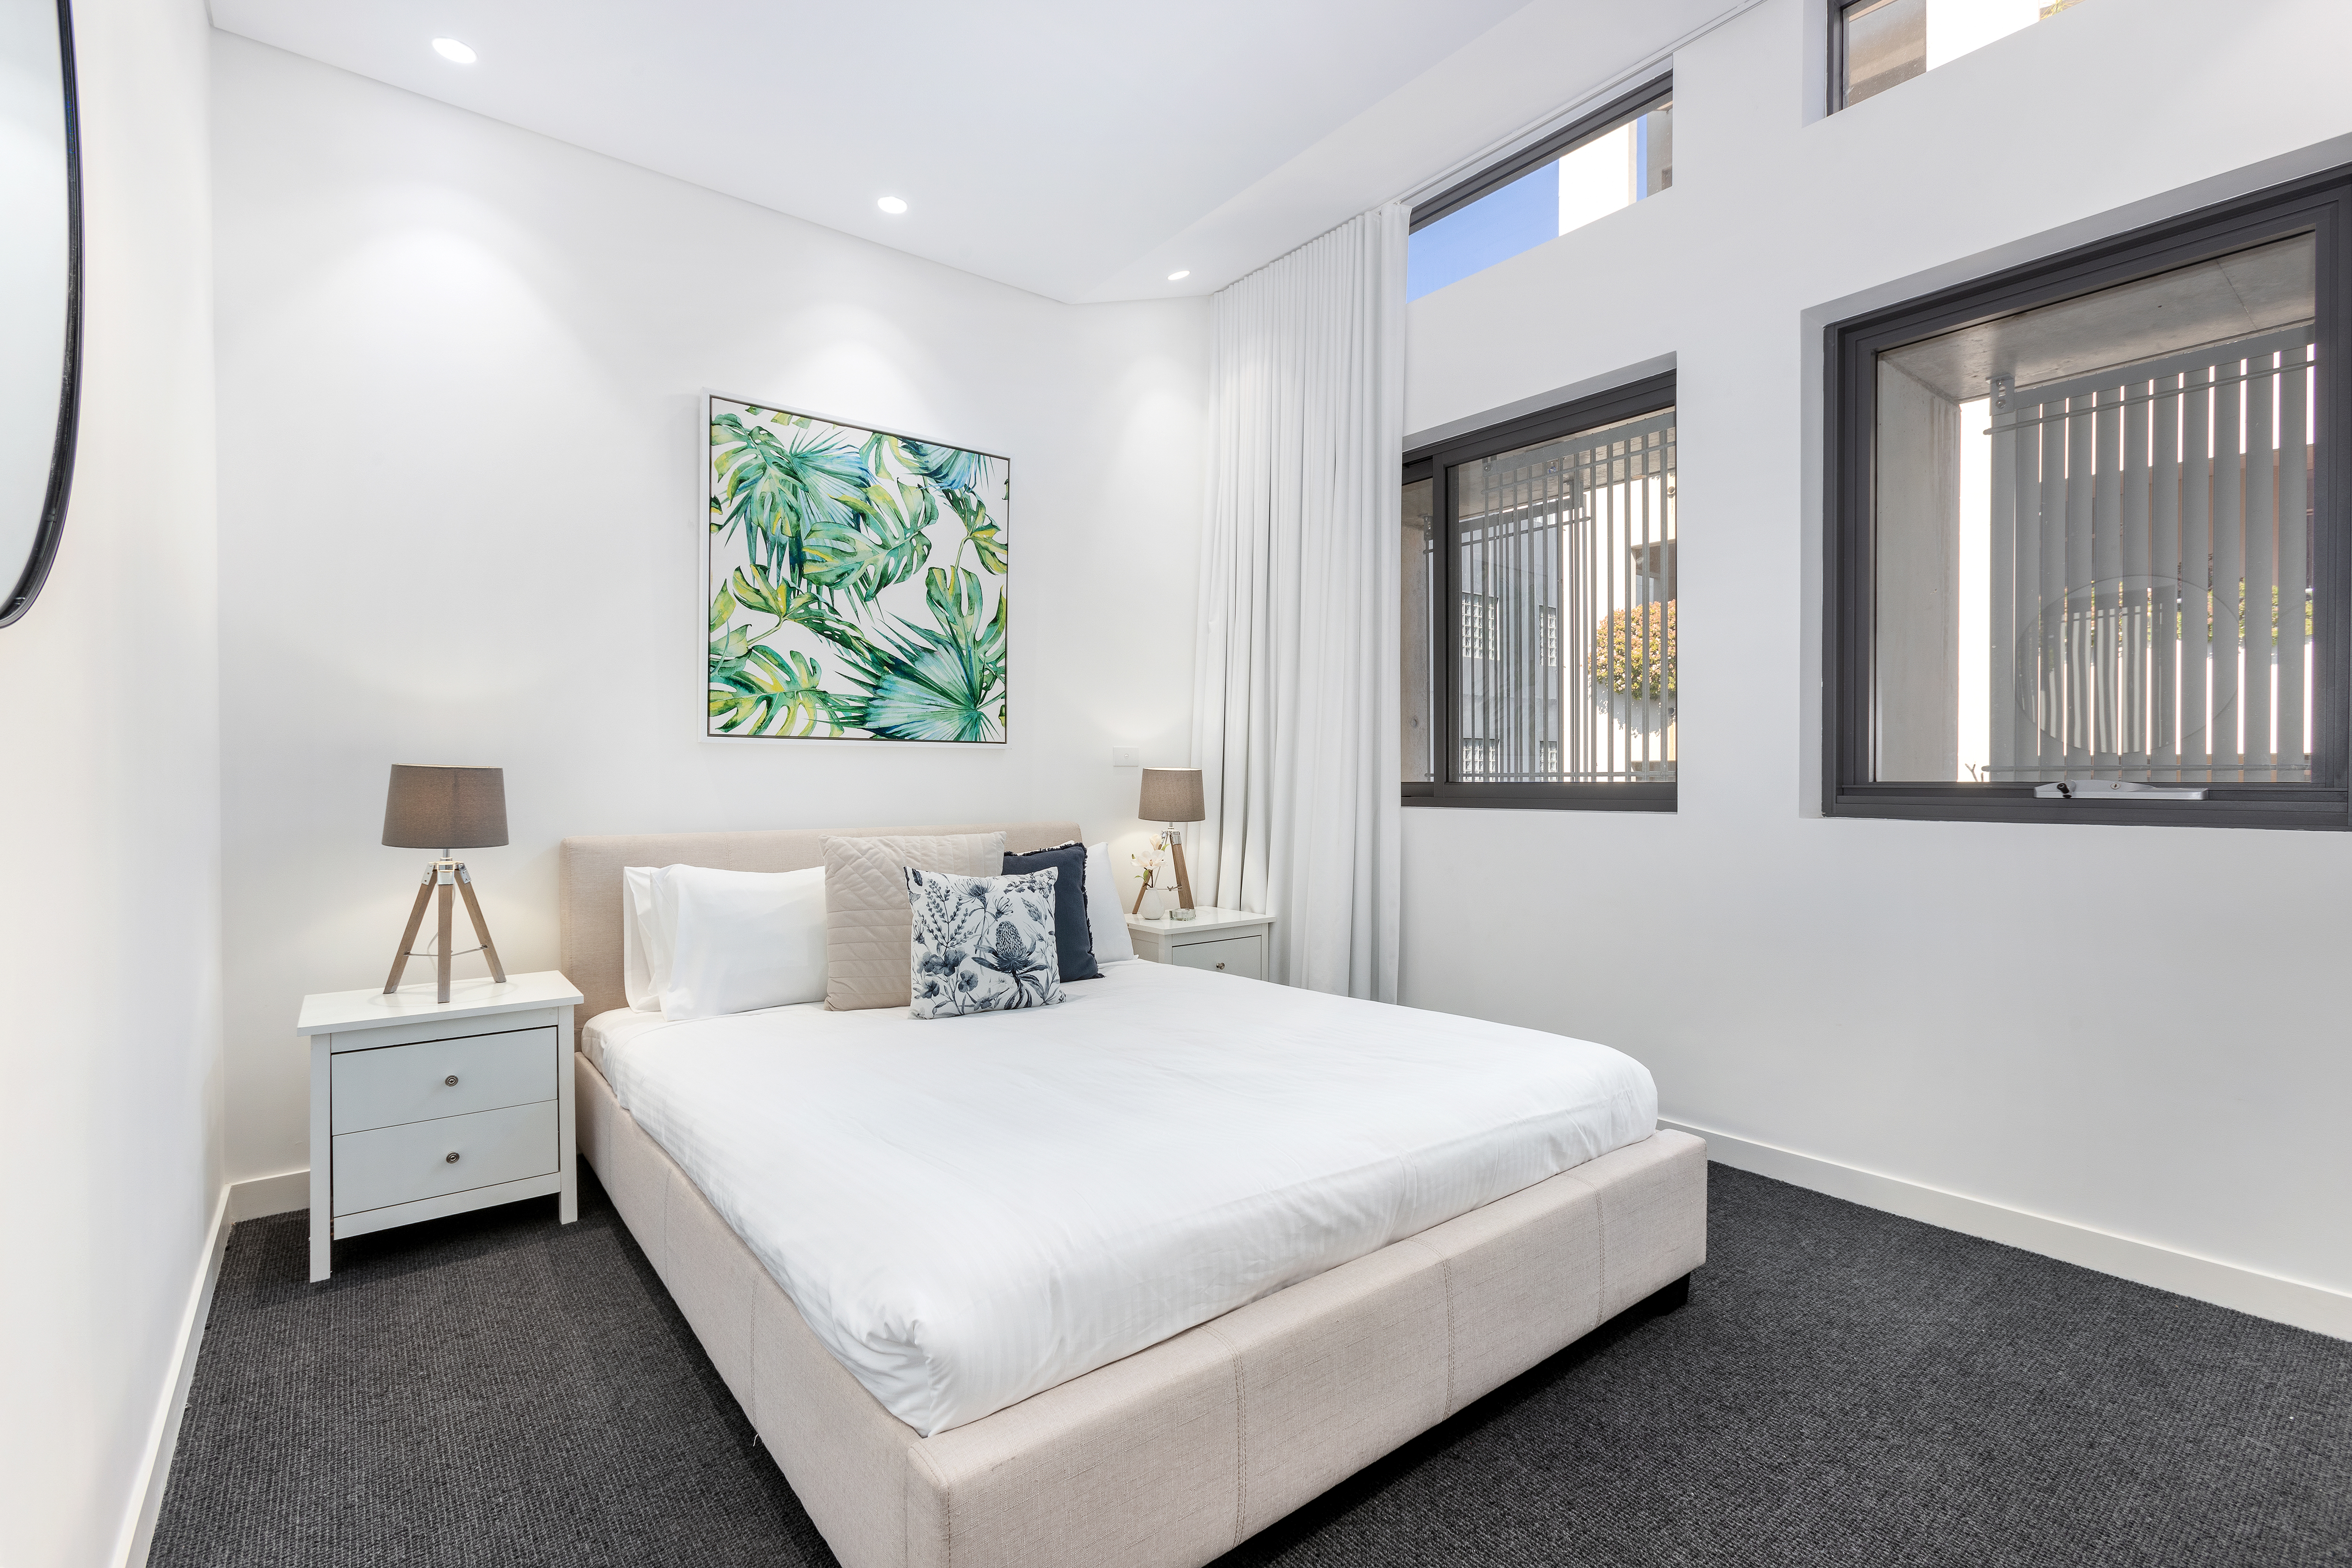 Bedroom 2 - Two Bedroom Apartment - Urban Rest - The Surry Apartments - Sydney